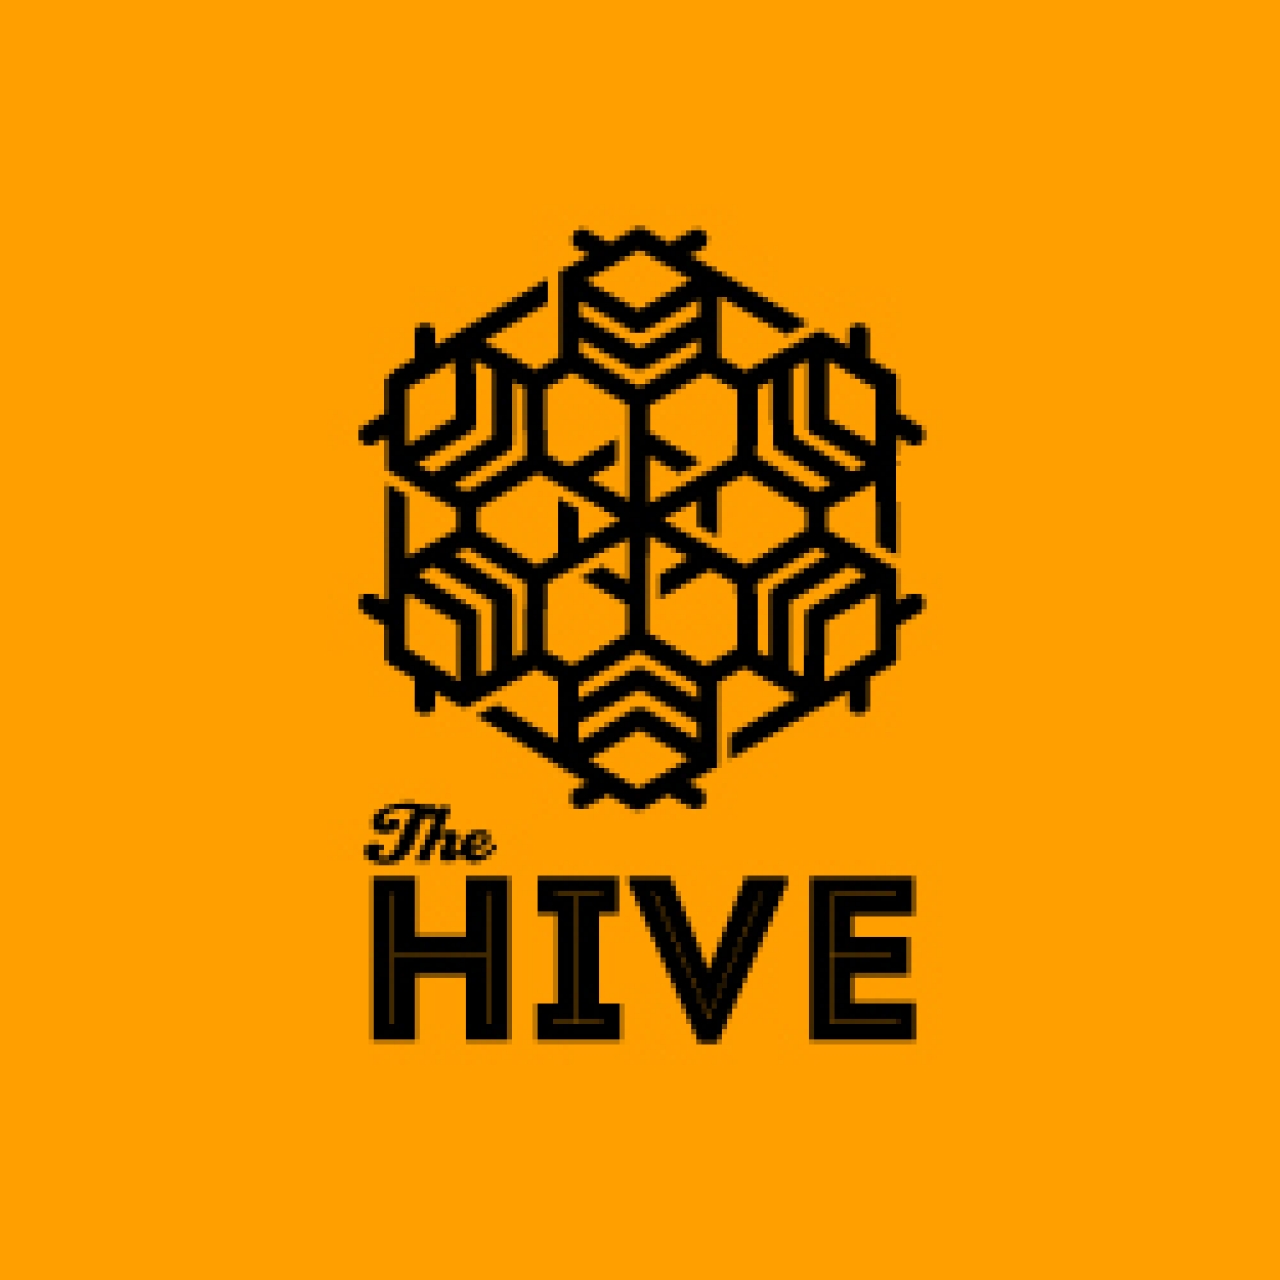 The Hive logo design is created from an octagon shape that is also the structure of a bee hive.